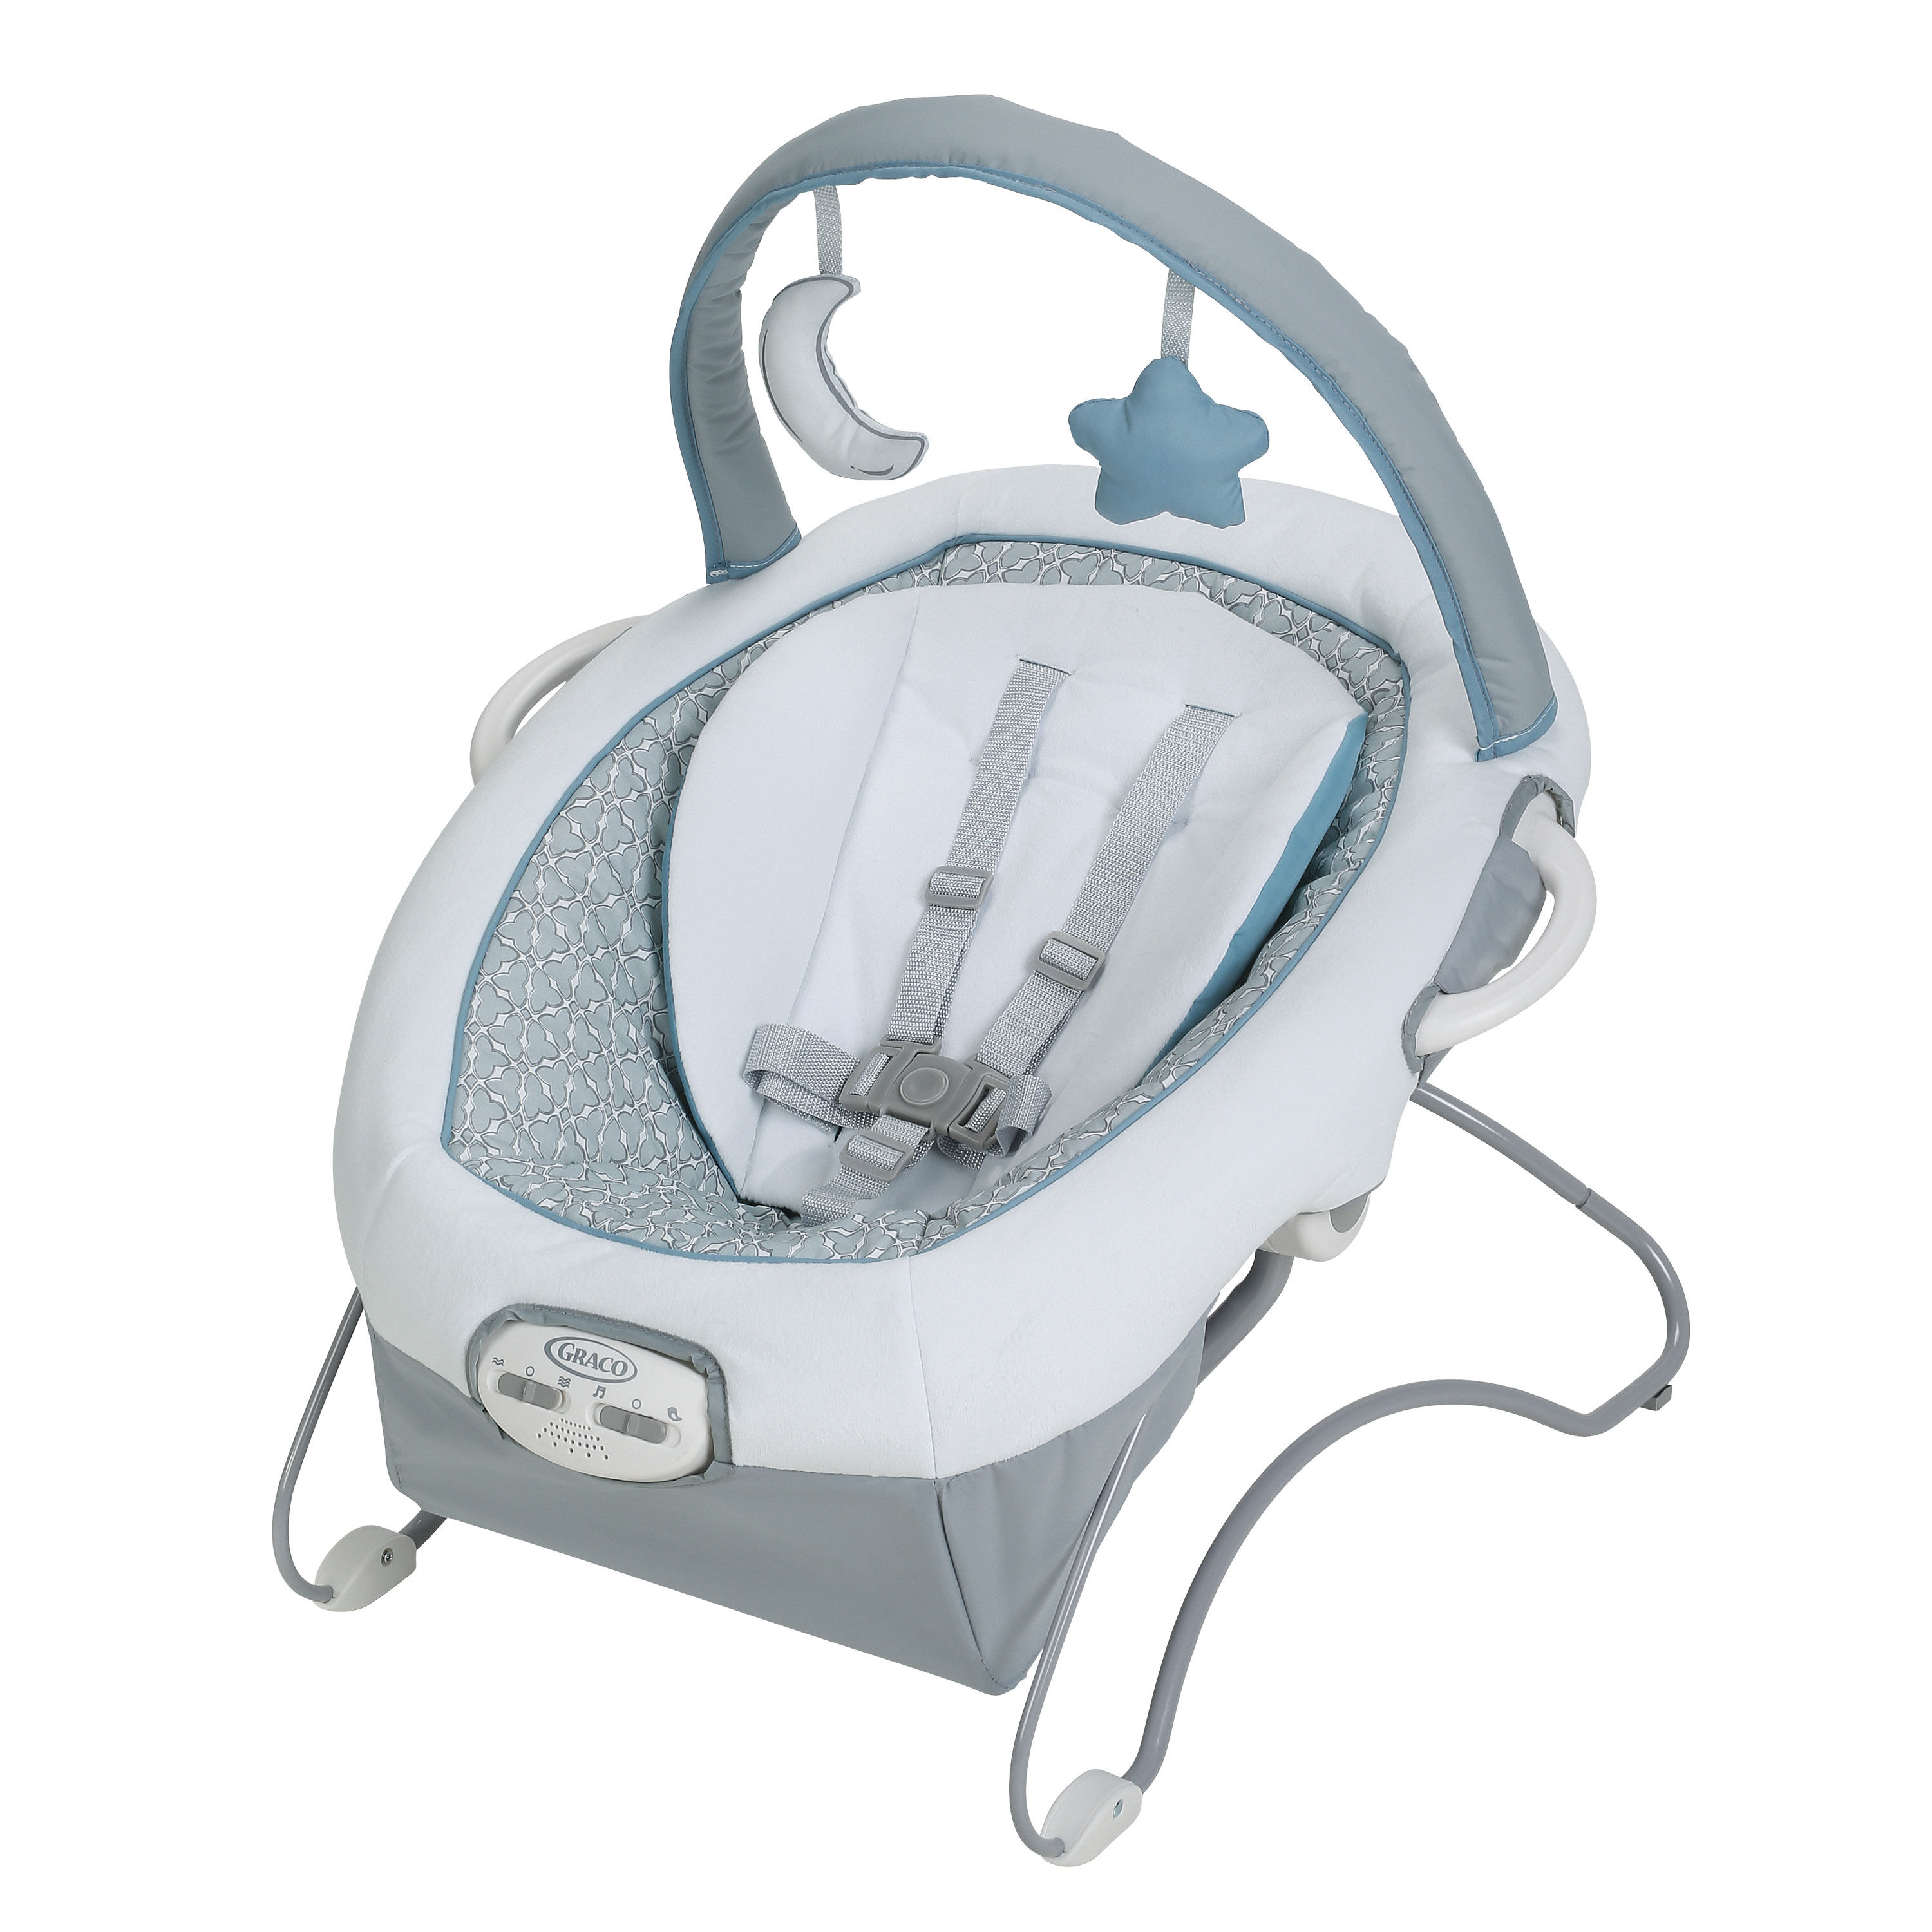 graco duet sway swing with portable bouncer